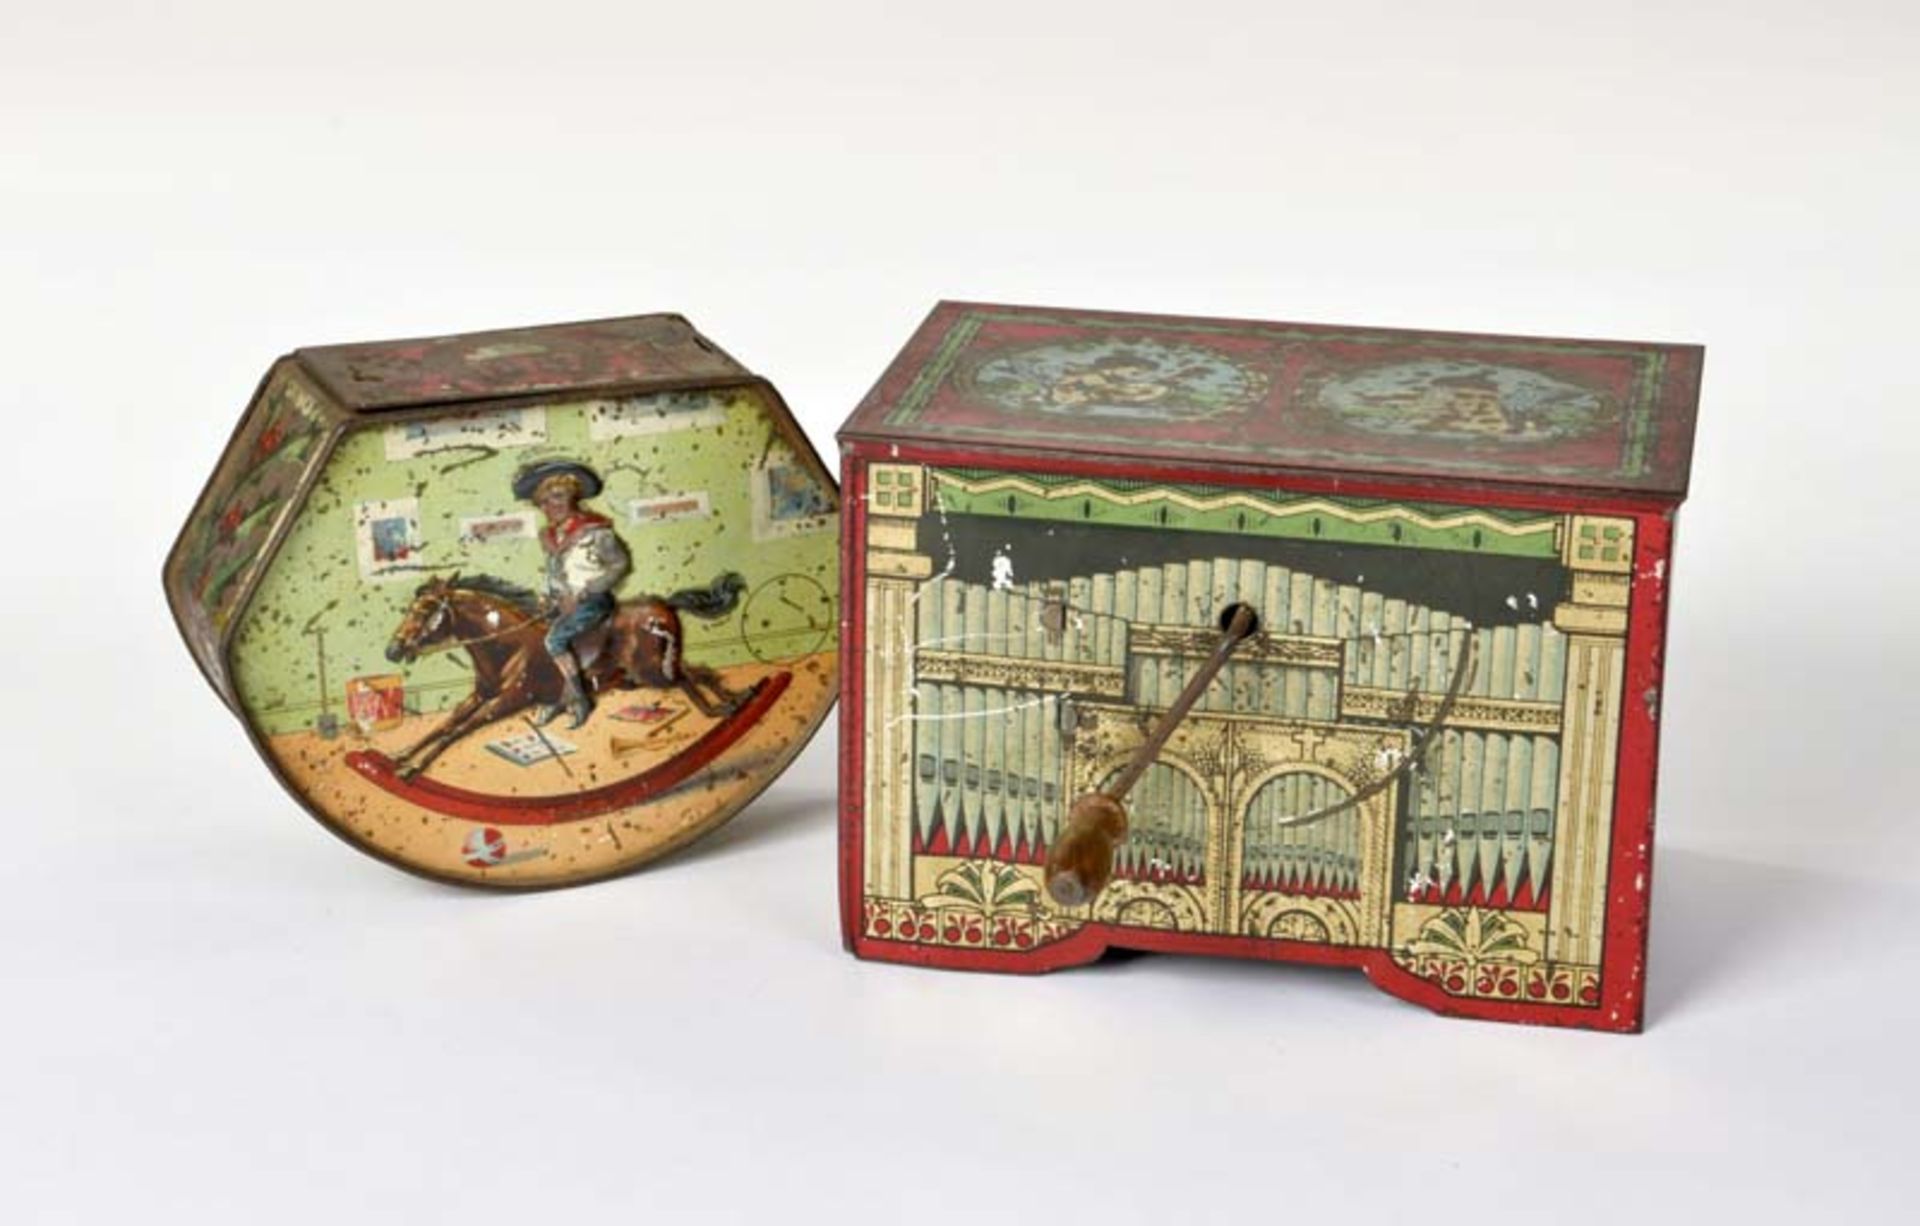 Gray Dunn & Co., Biscuit Can with Rswing Rider + Can with Music Box, tin, paint d. due to age, C 2-